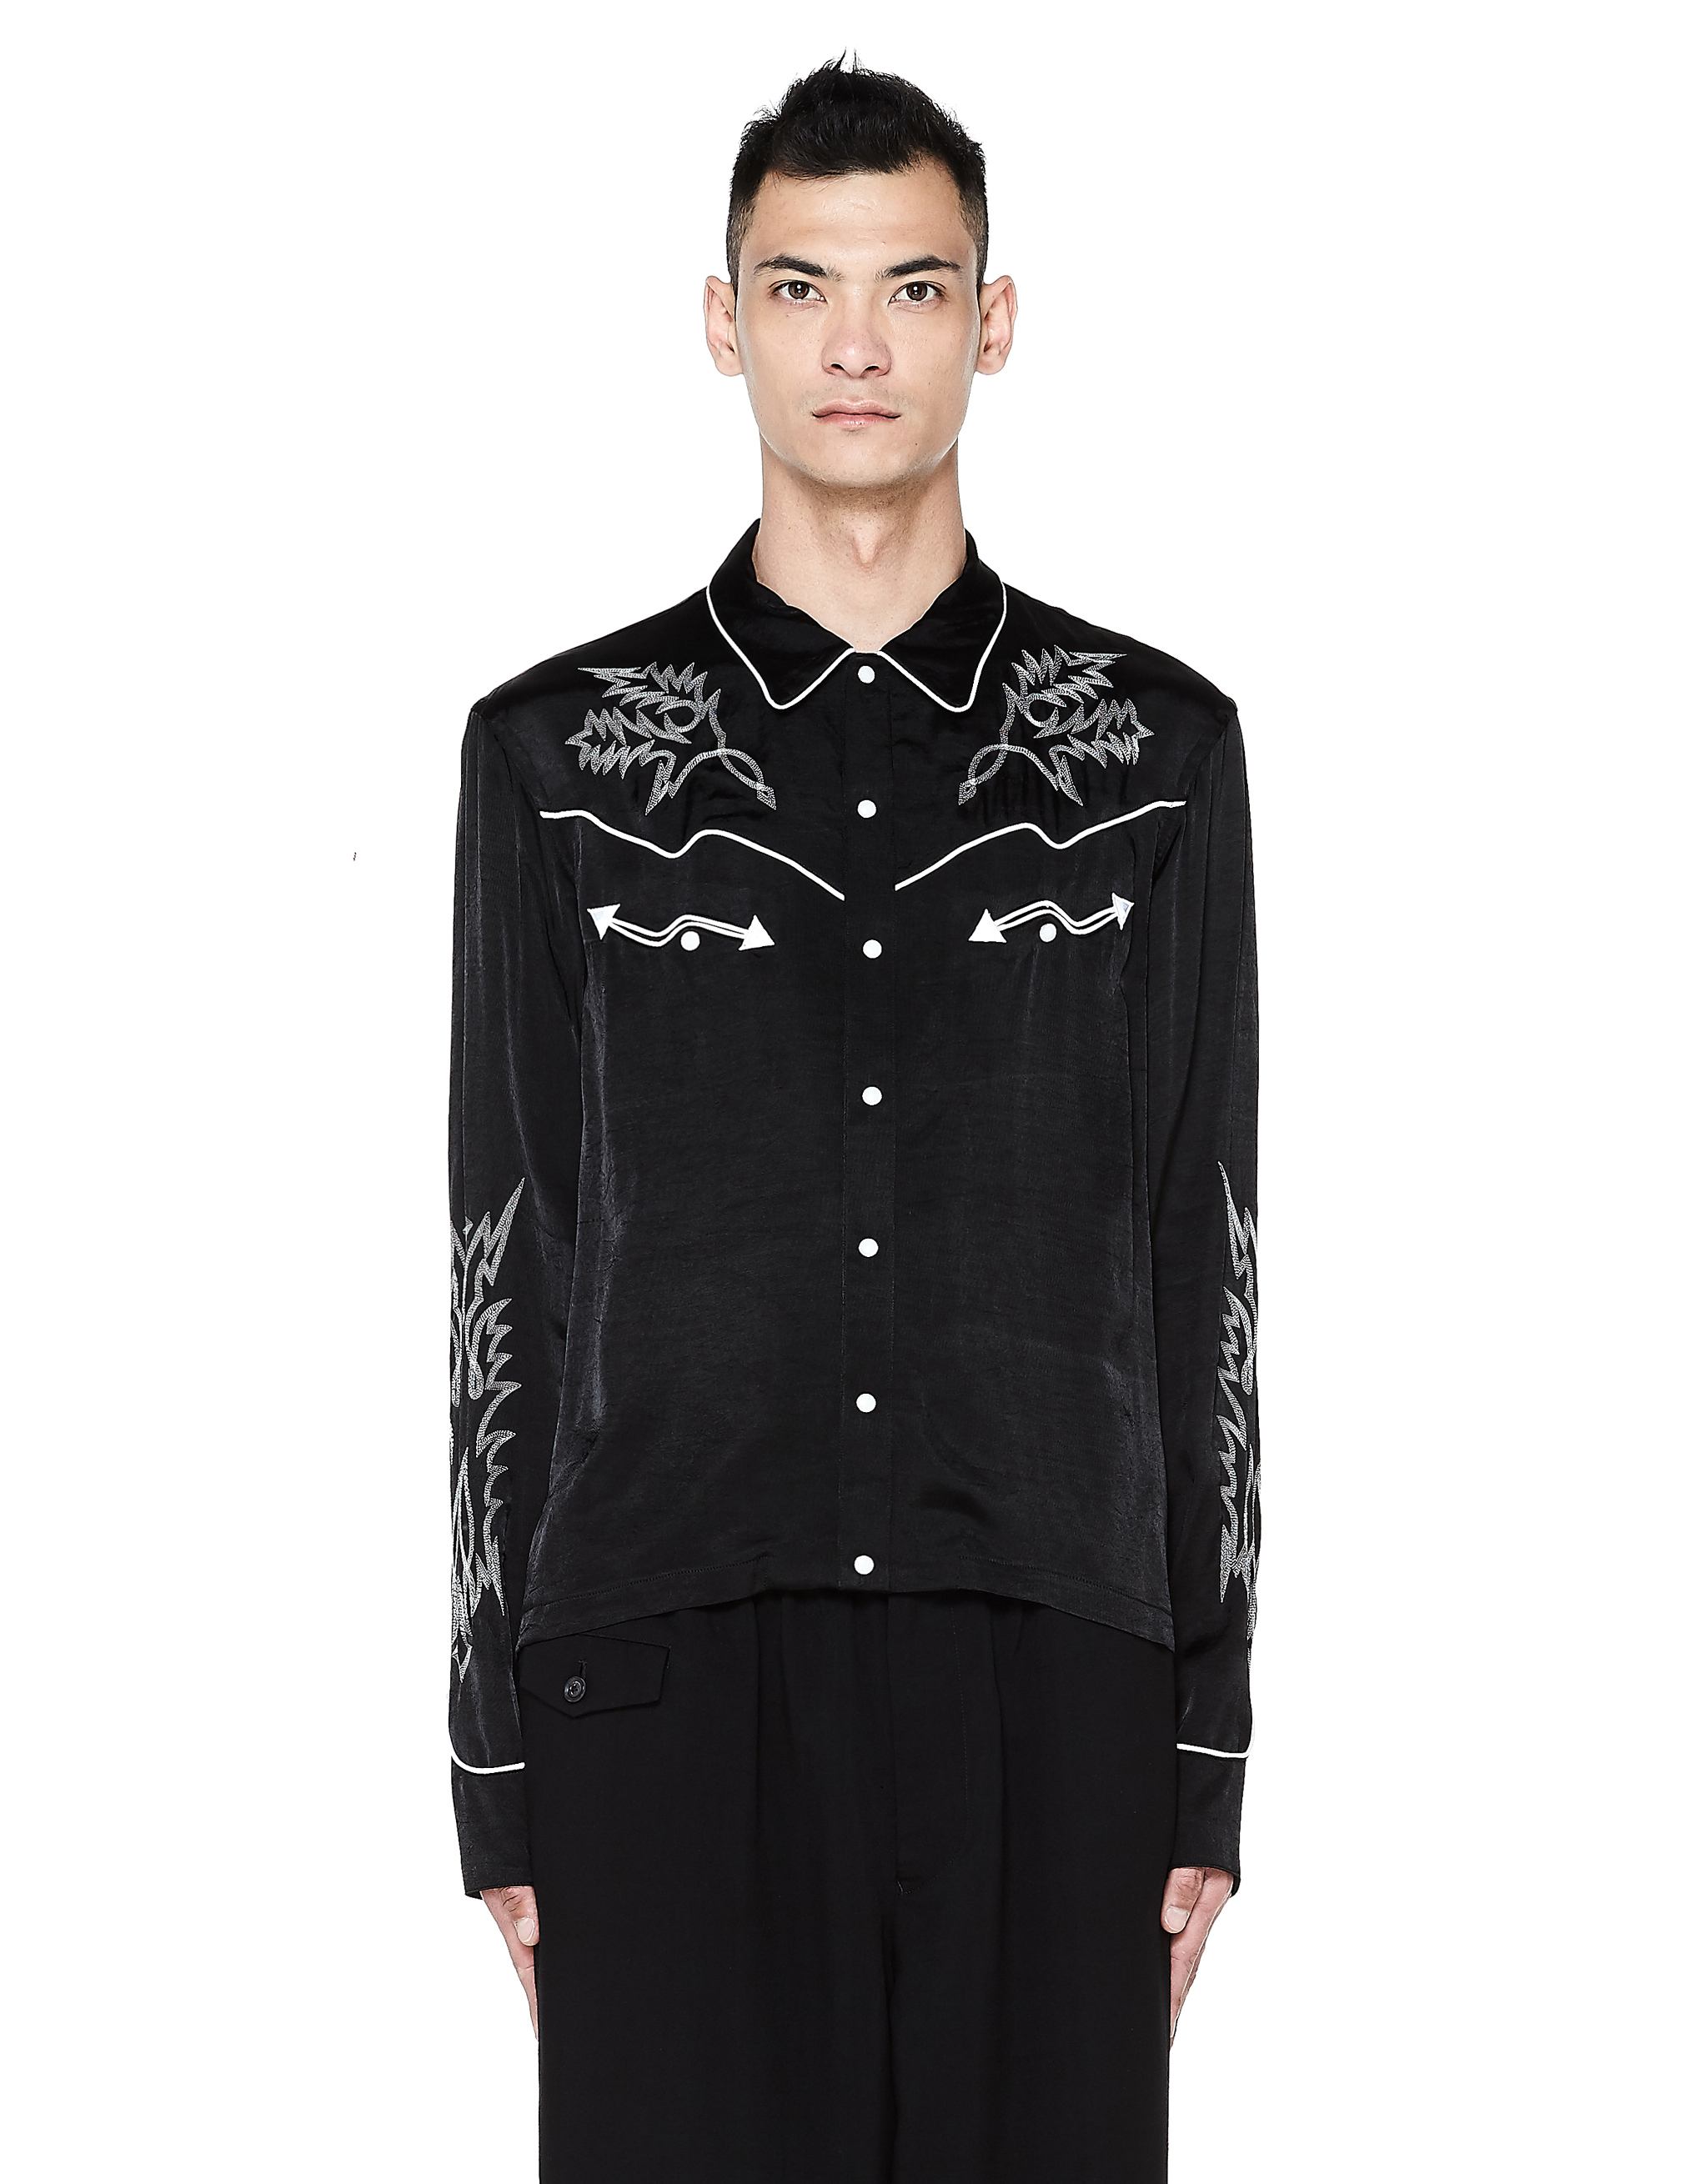 THE SOLOIST BLACK EMBROIDERED SHIRT,ss.0003